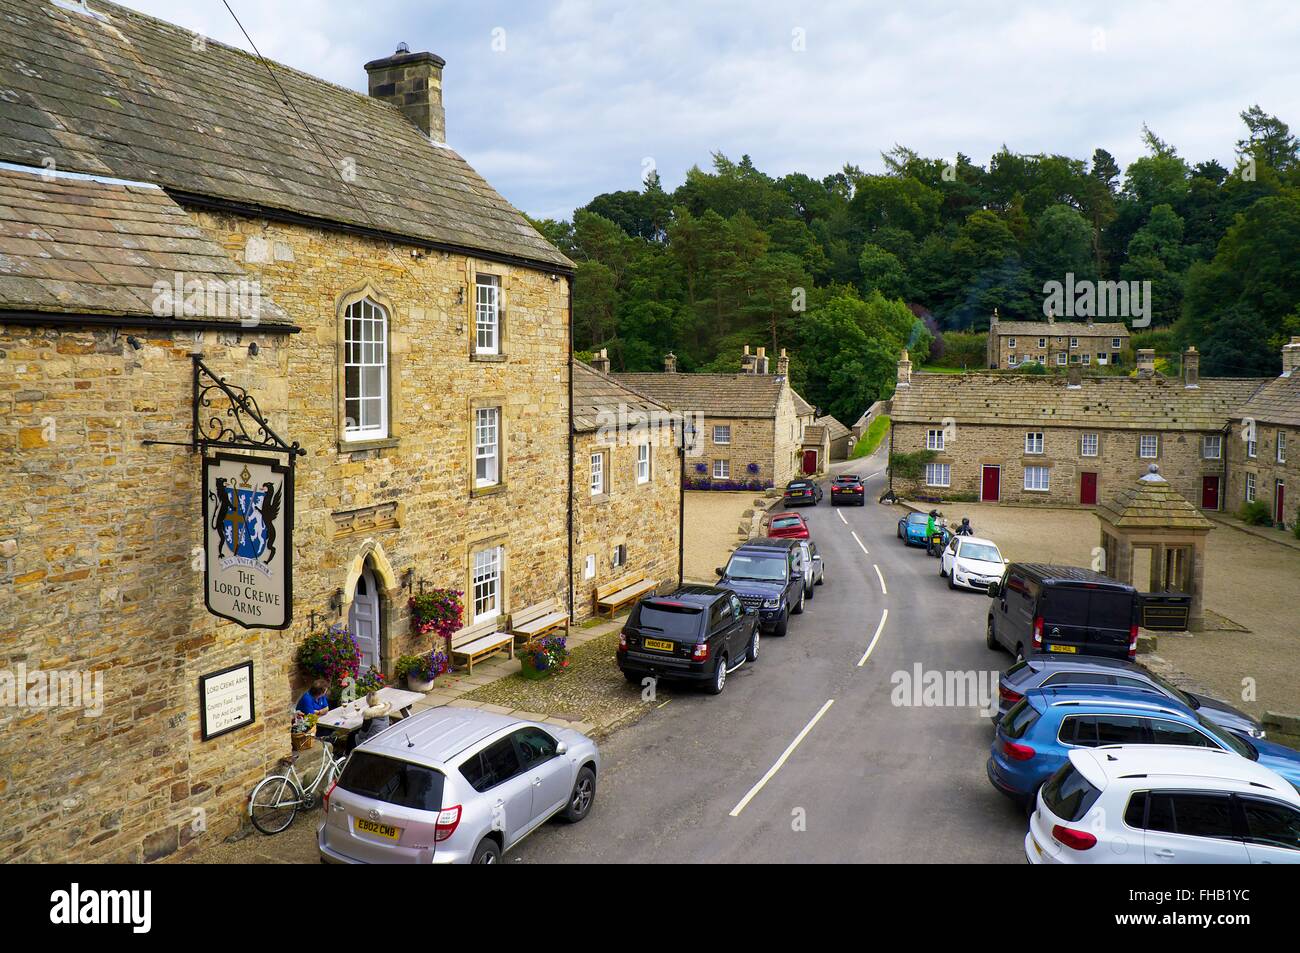 The Lord Crewe Arms, Blanchland, Derwent Valley, North Pennines Area of Outstanding Natural Beauty, Northumberland, England, UK. Stock Photo